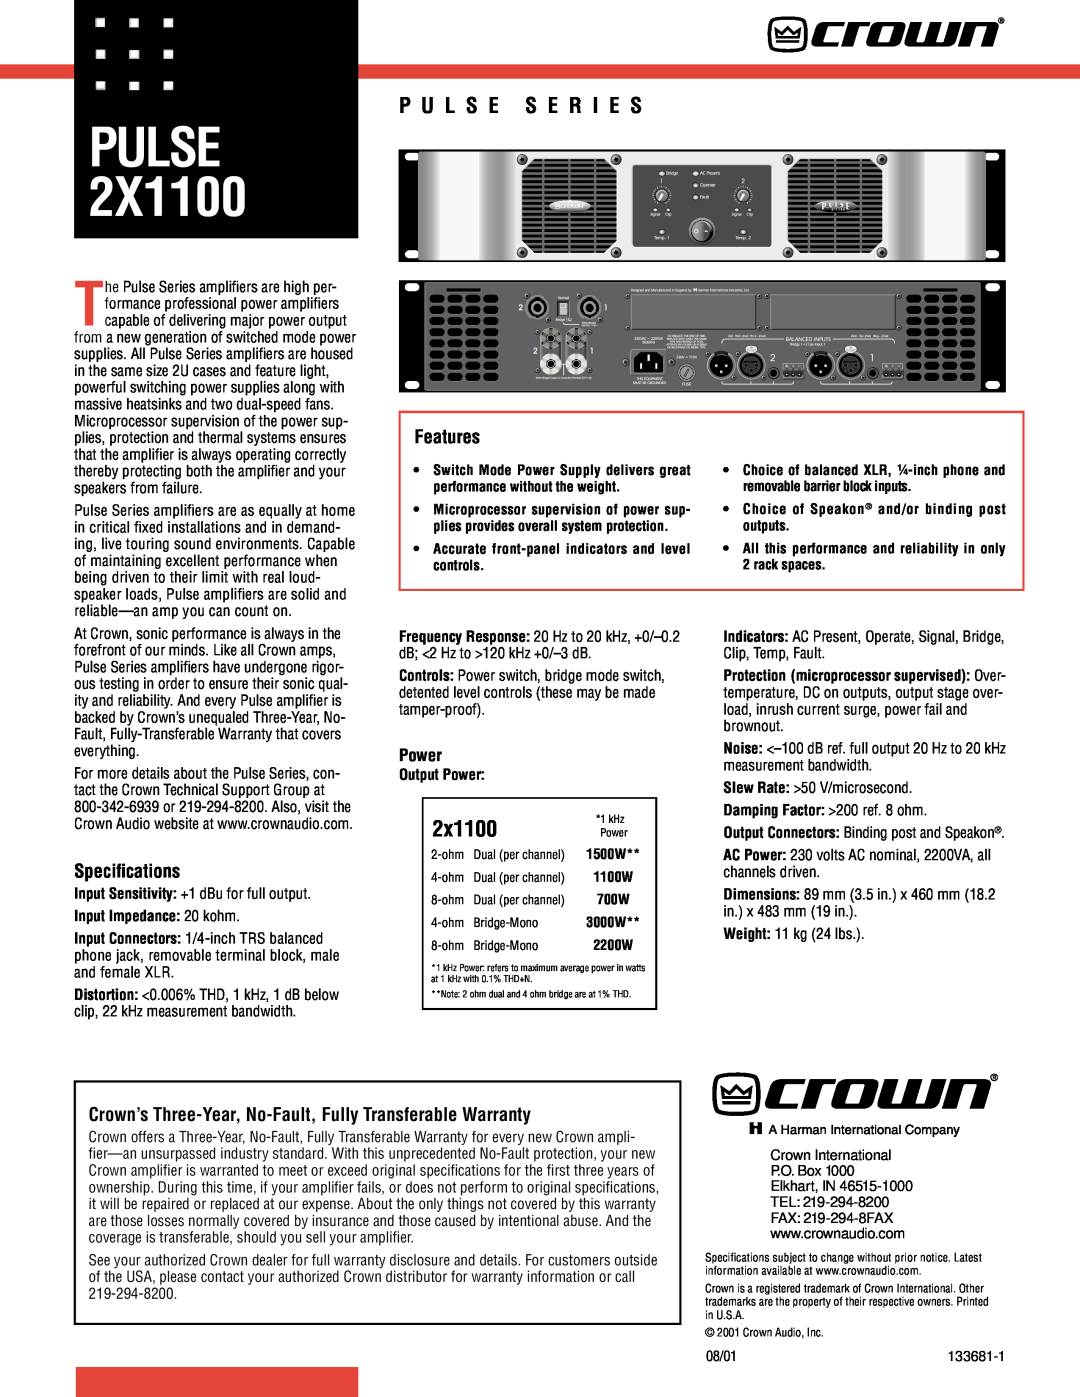 Crown Audio 2X1100 specifications Pulse, 2x1100, P U L S E S E R I E S, Features, Speciﬁcations, Power 